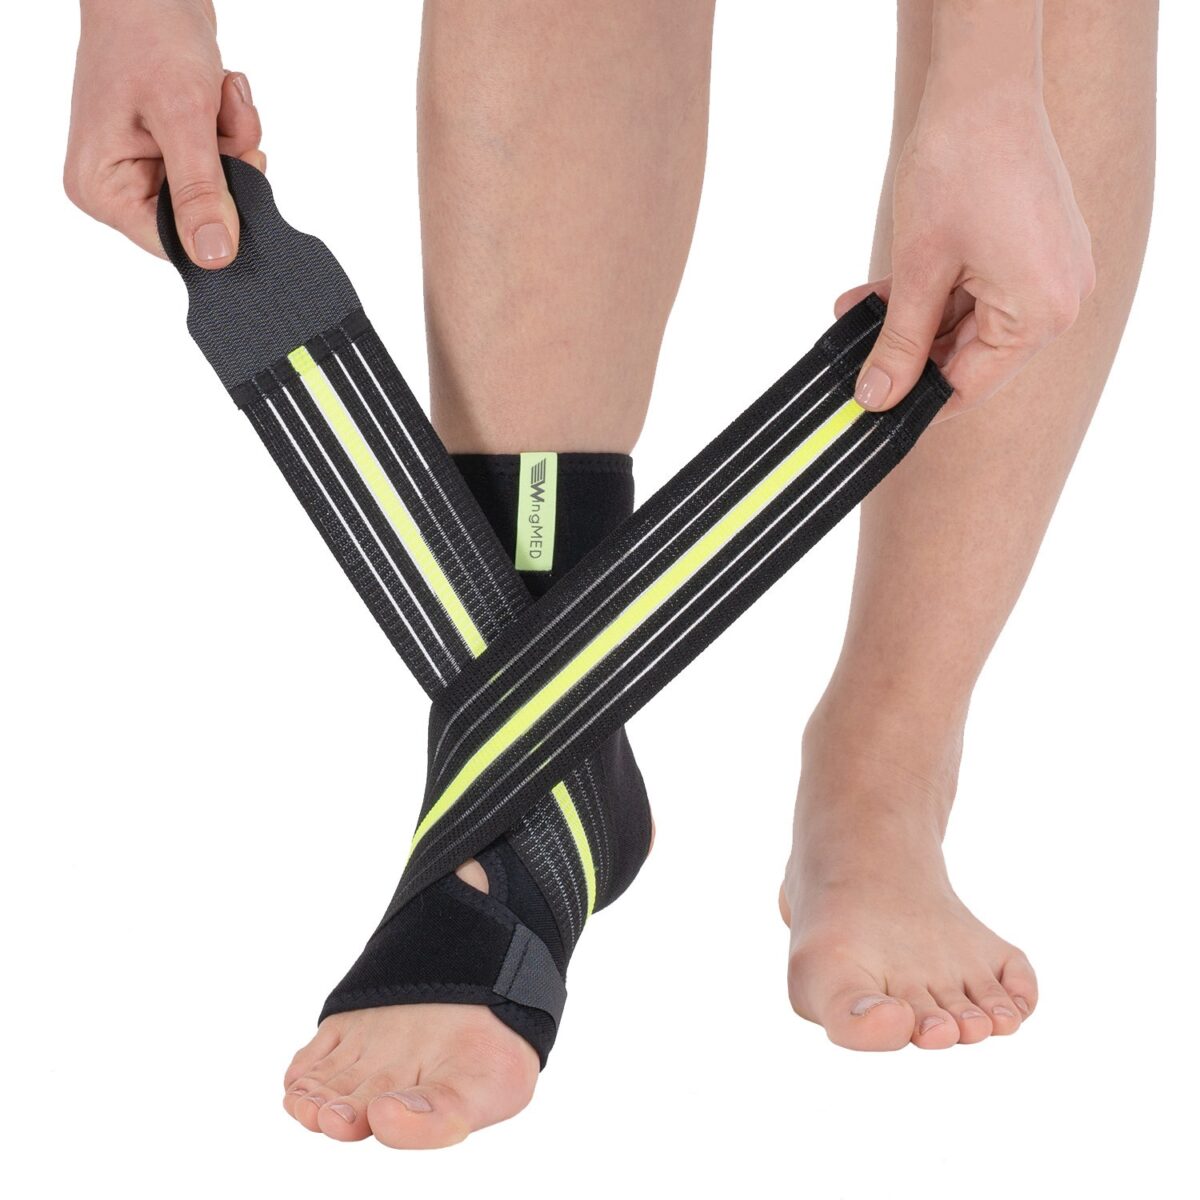 wingmed orthopedic equipments W603 ankle support with strap 84 1